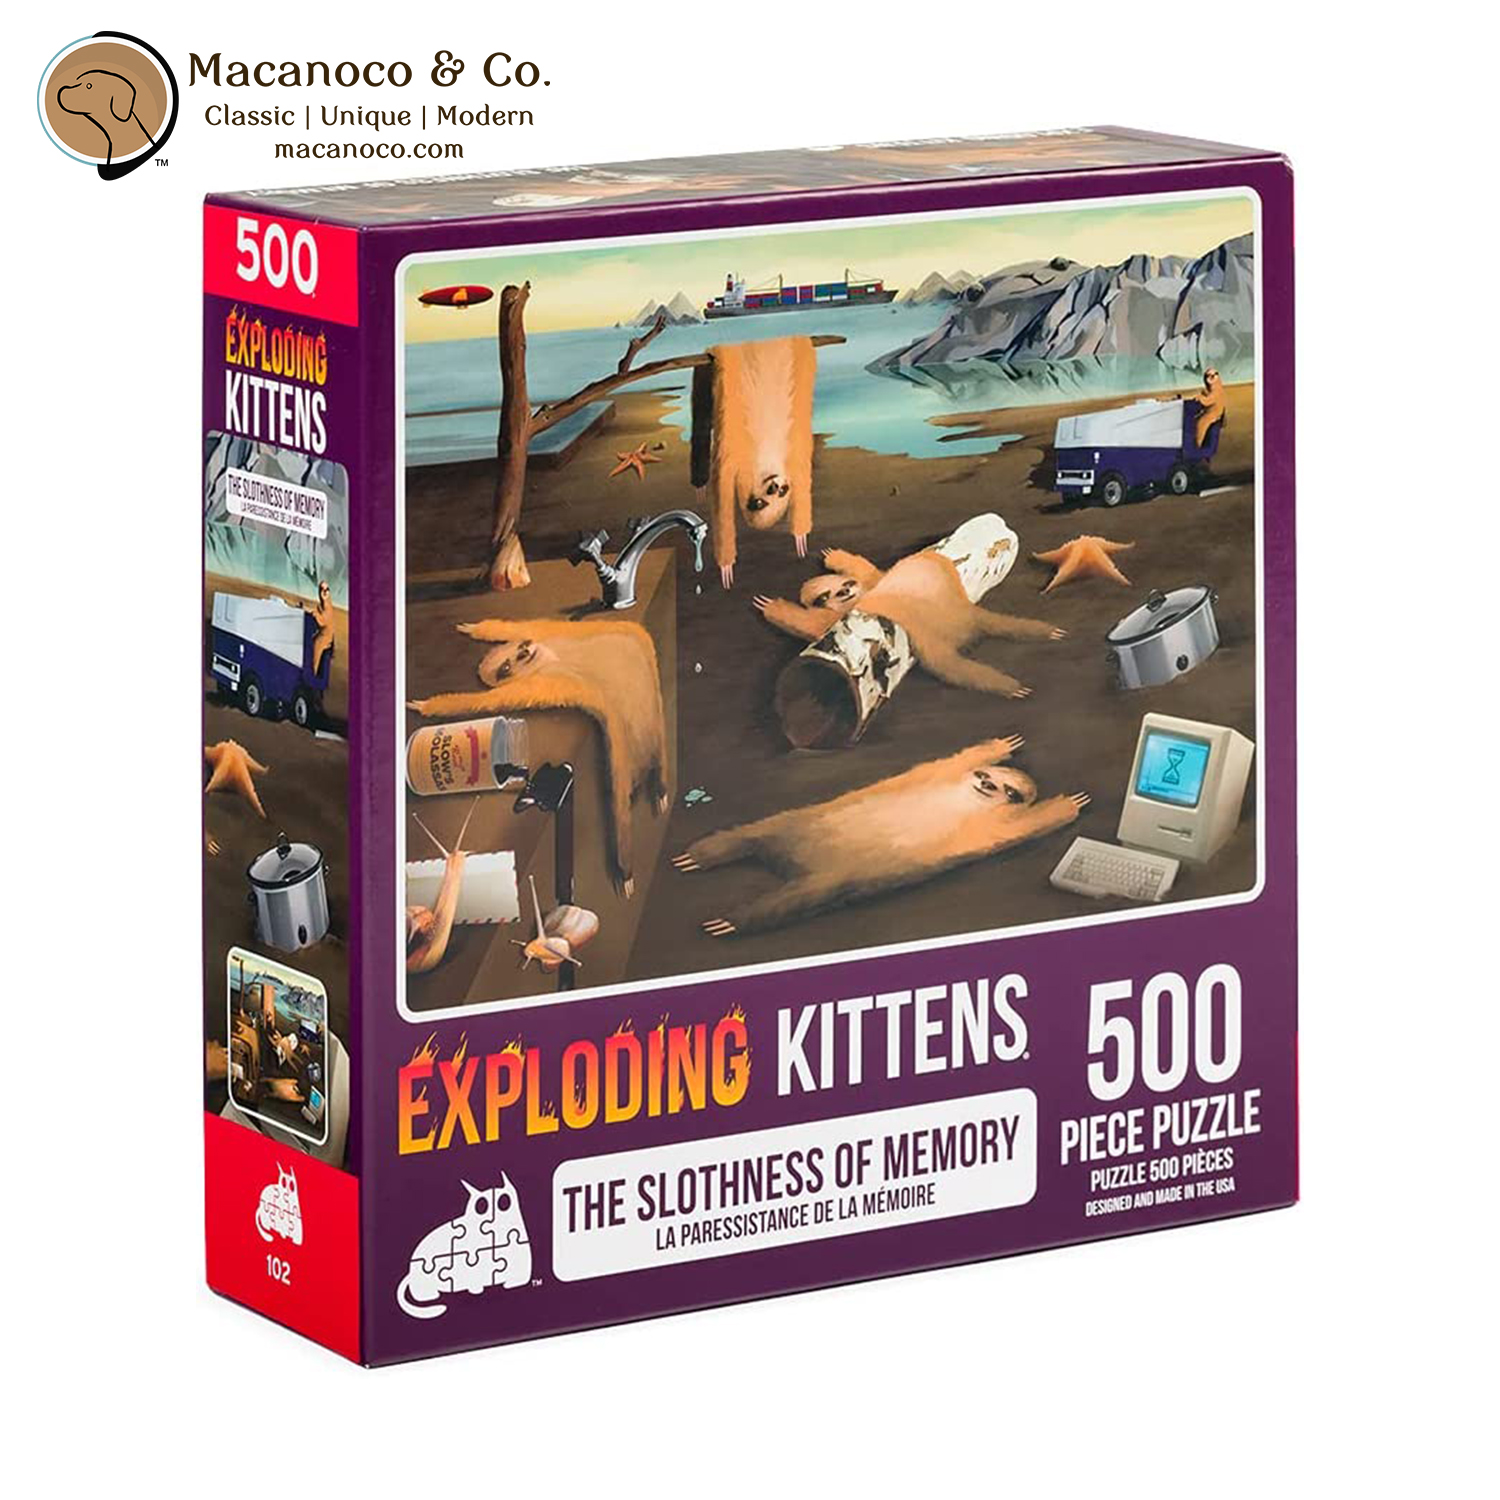 LIT-202110-3 Exploding Kittens 500 Piece puzzle Slothness of Memory